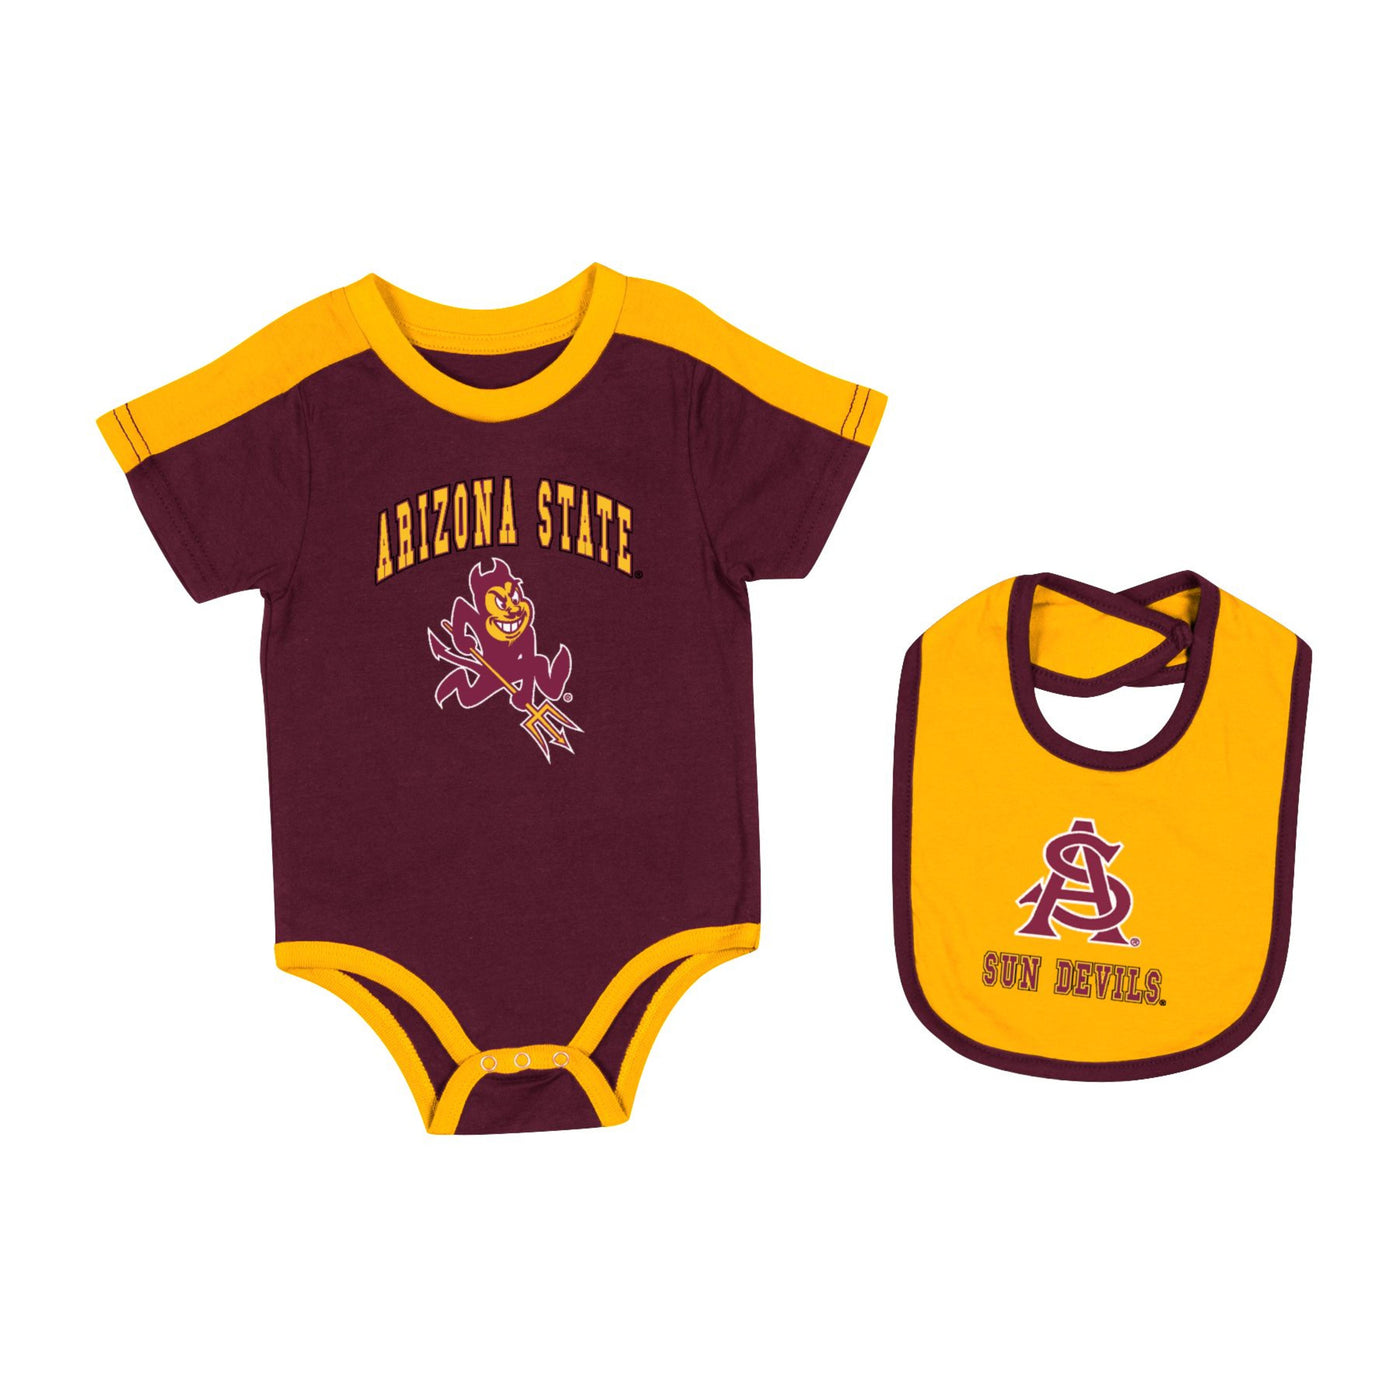 ASU maroon infant onesie with the text 